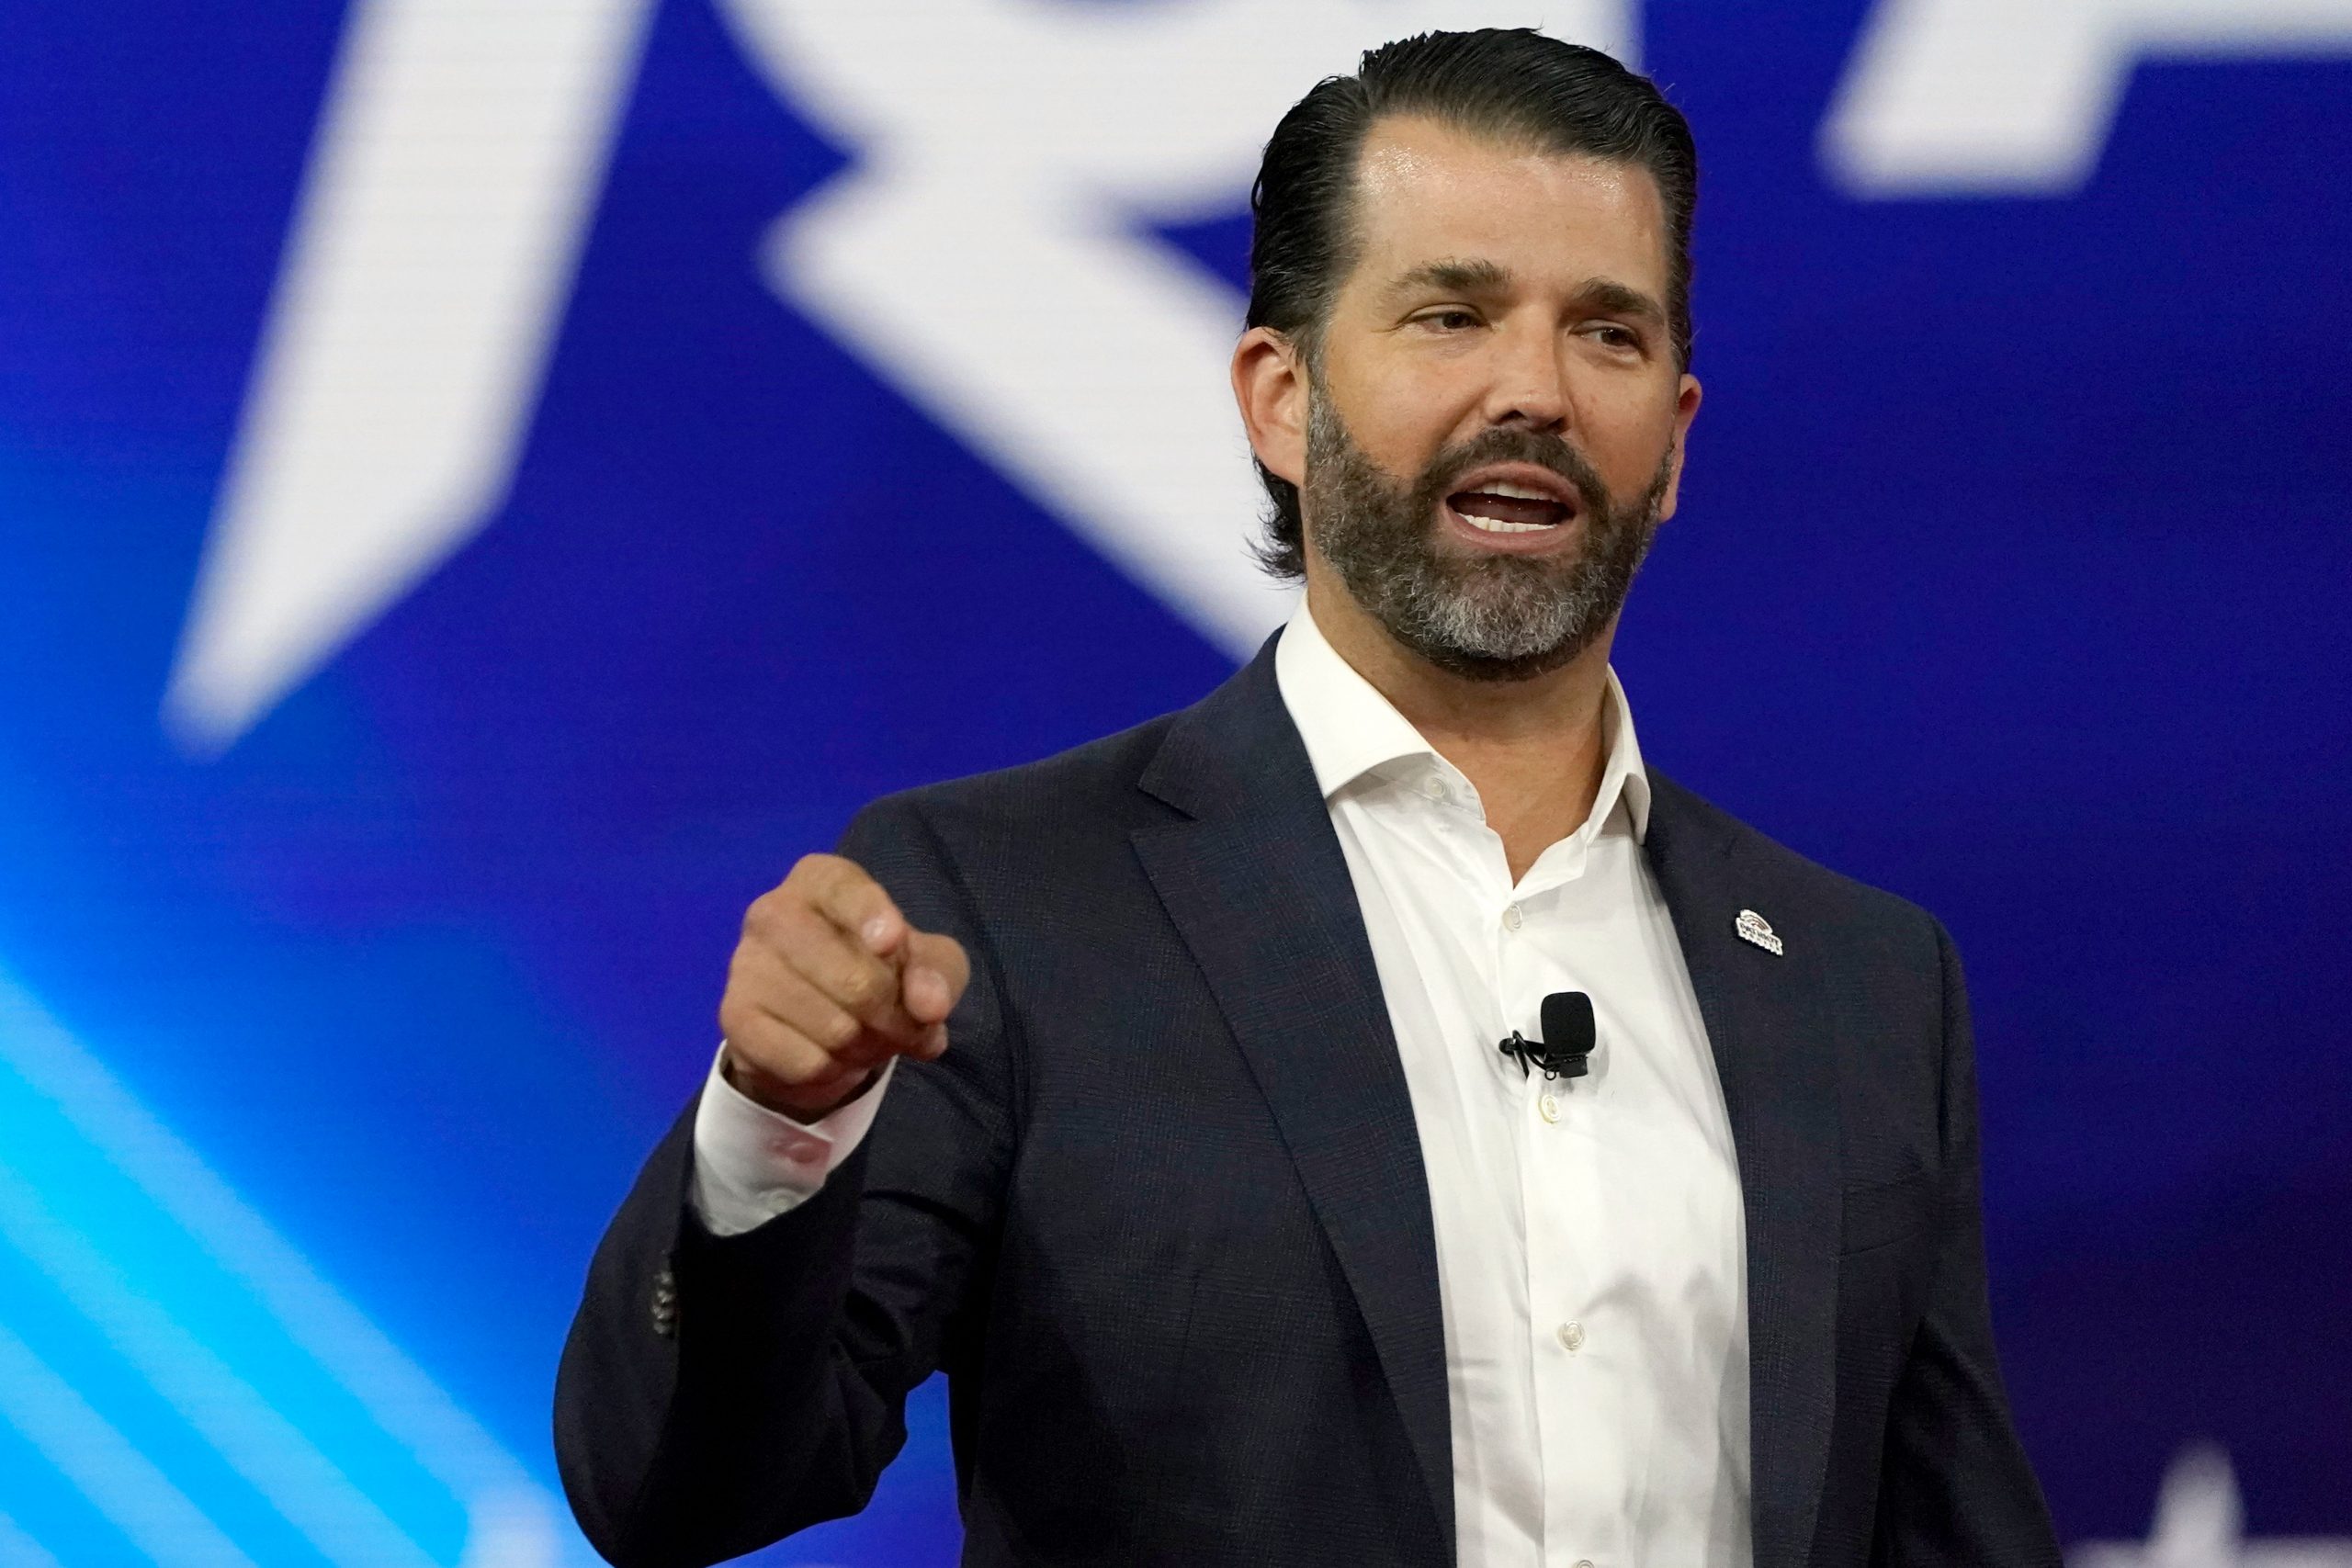 Donald Trump Jr text shows ideas to overturn 2020 election: Report